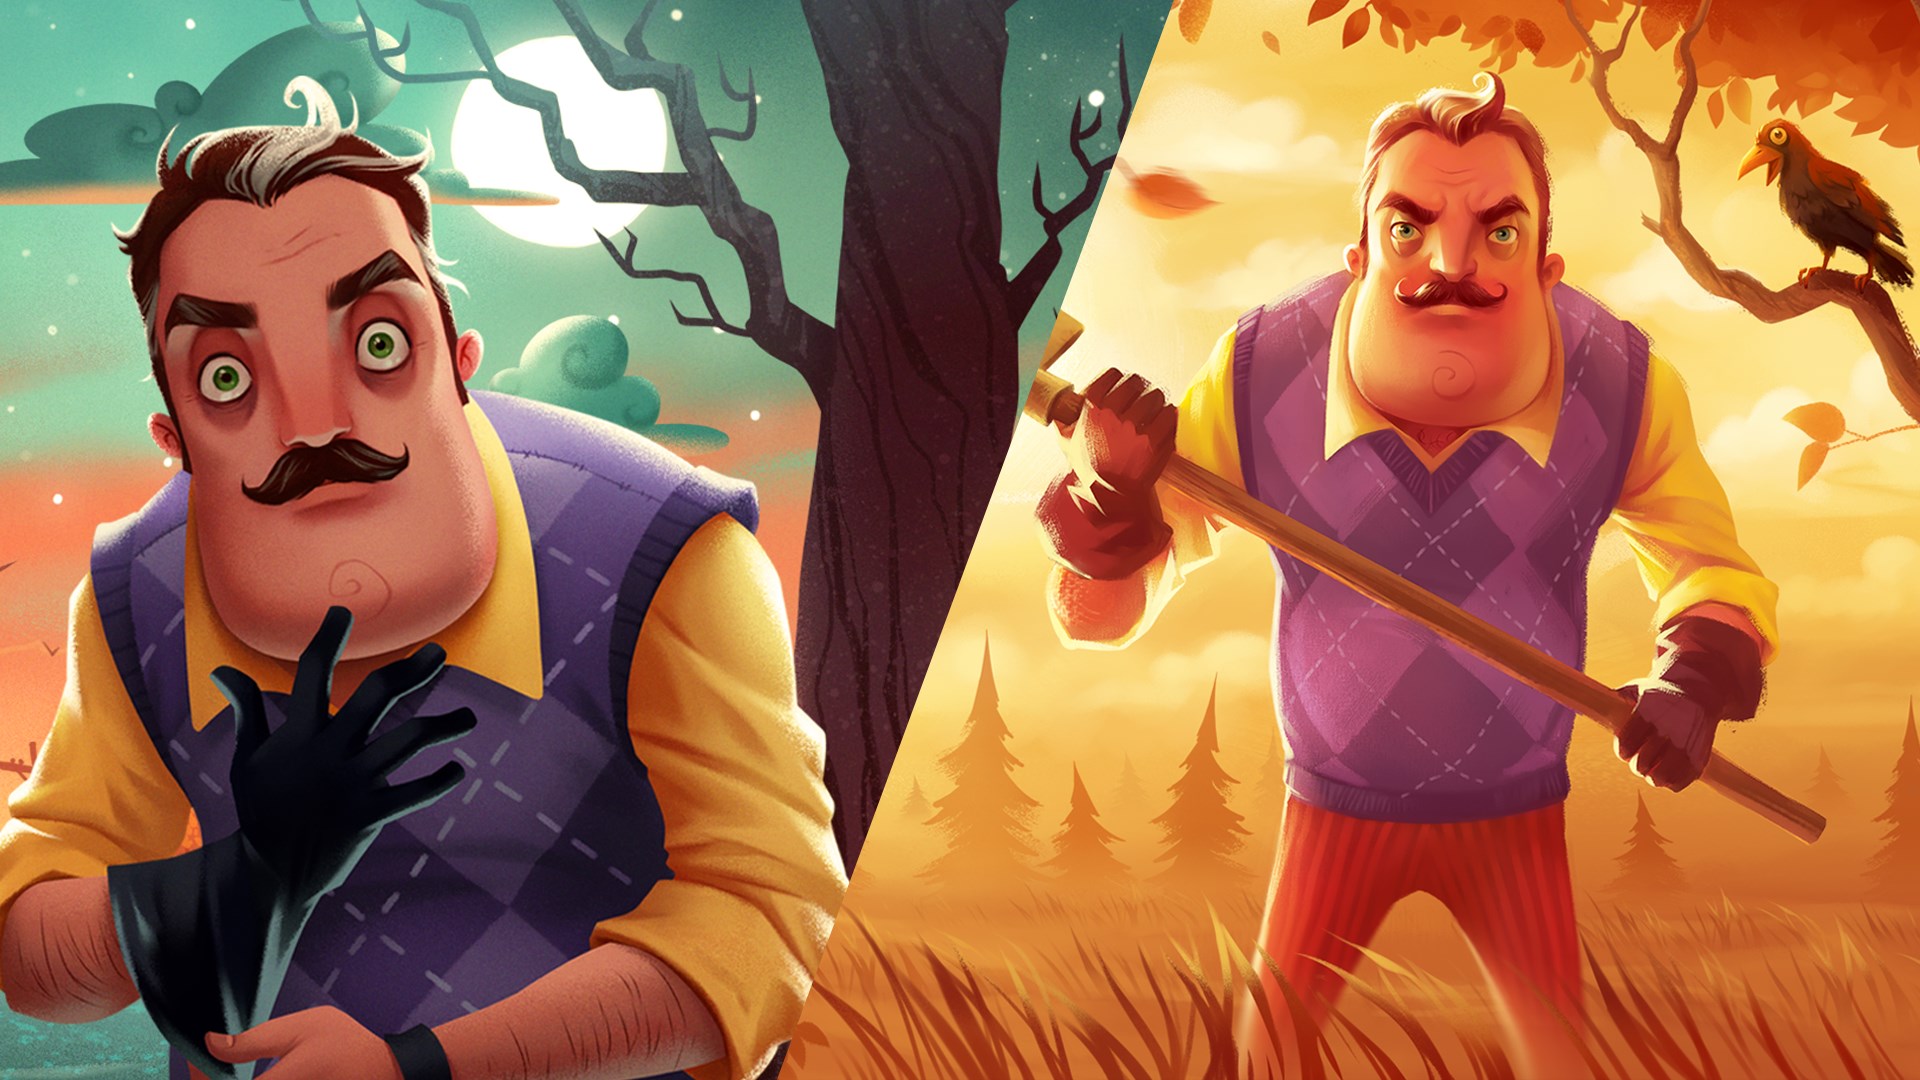 Buy Secret Neighbor from the Humble Store